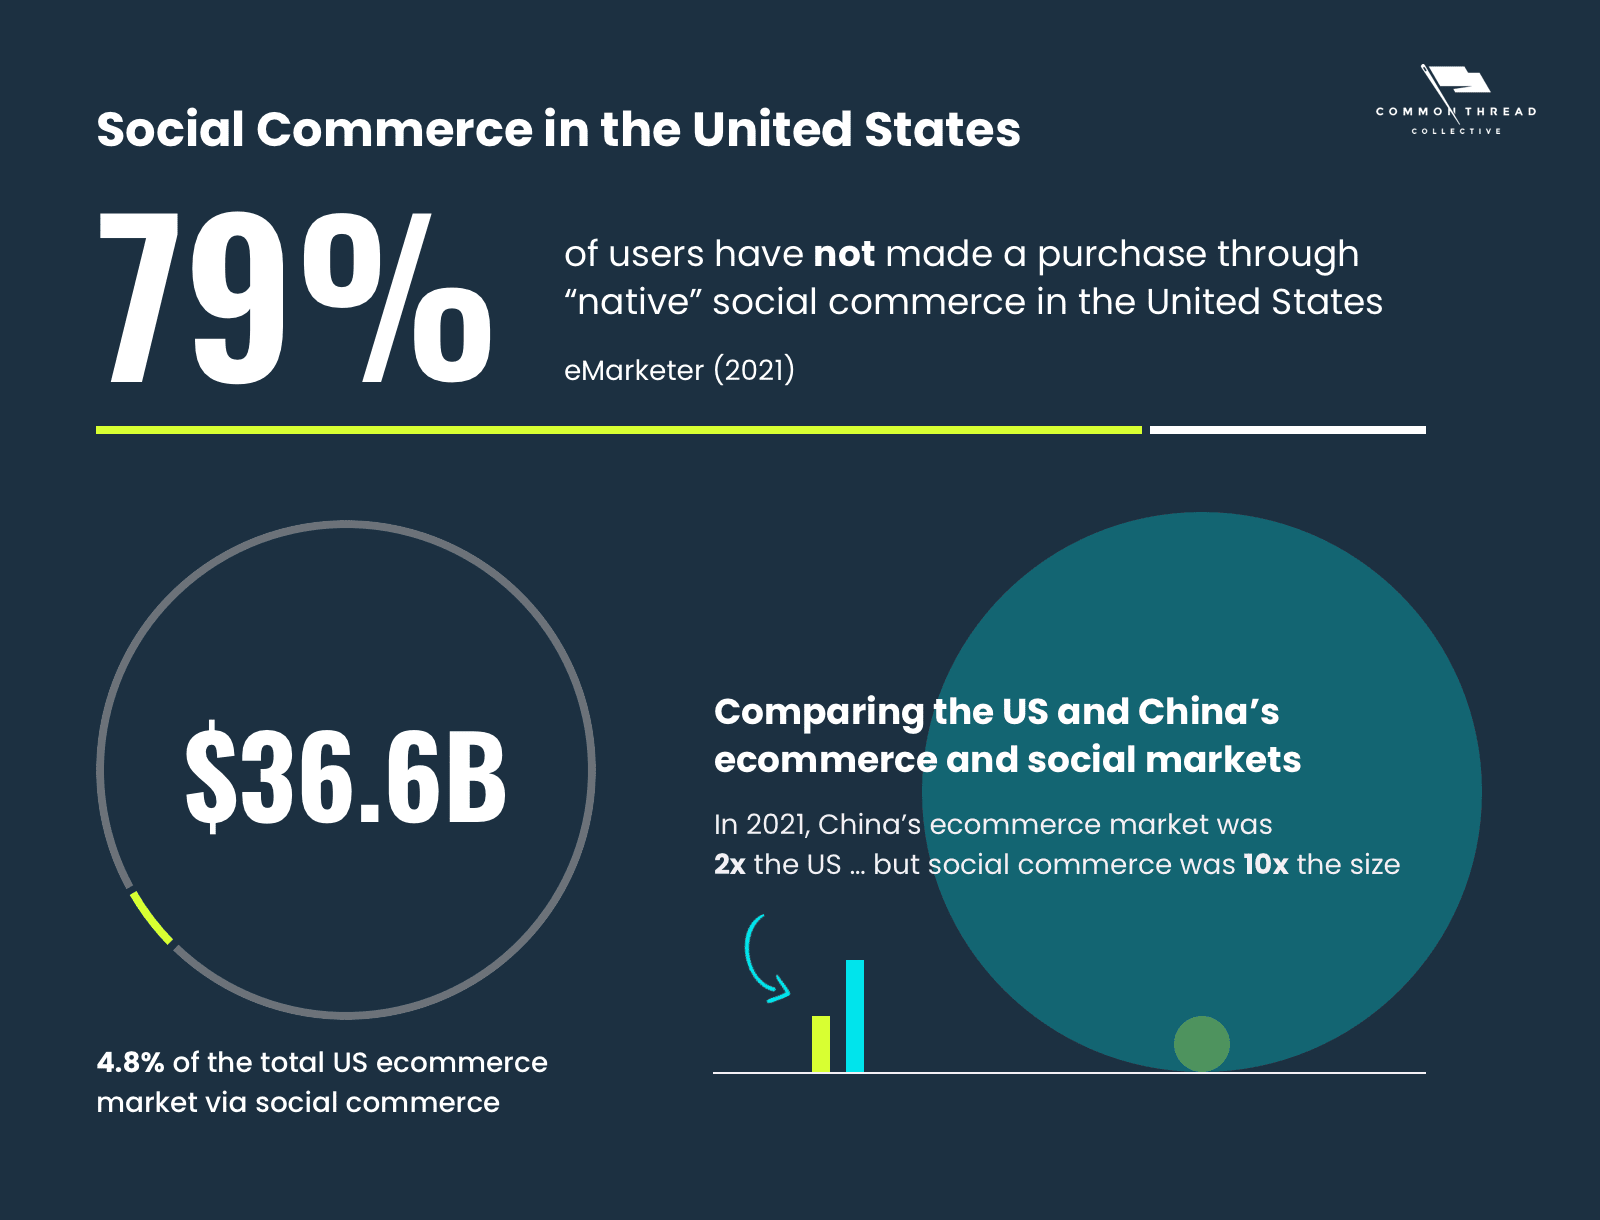 Native social commerce usage rates